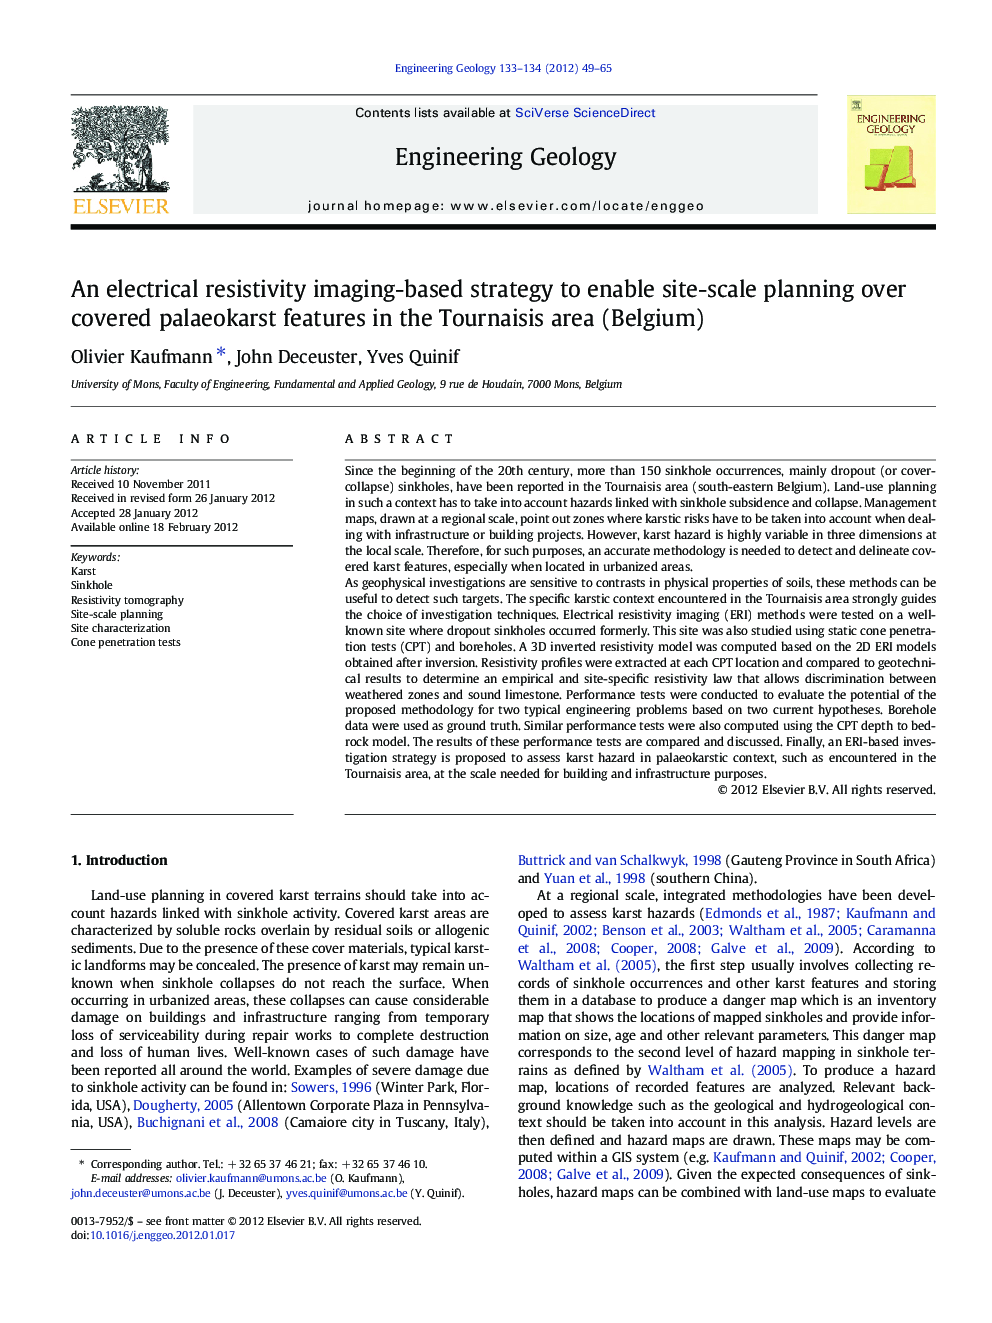 An electrical resistivity imaging-based strategy to enable site-scale planning over covered palaeokarst features in the Tournaisis area (Belgium)